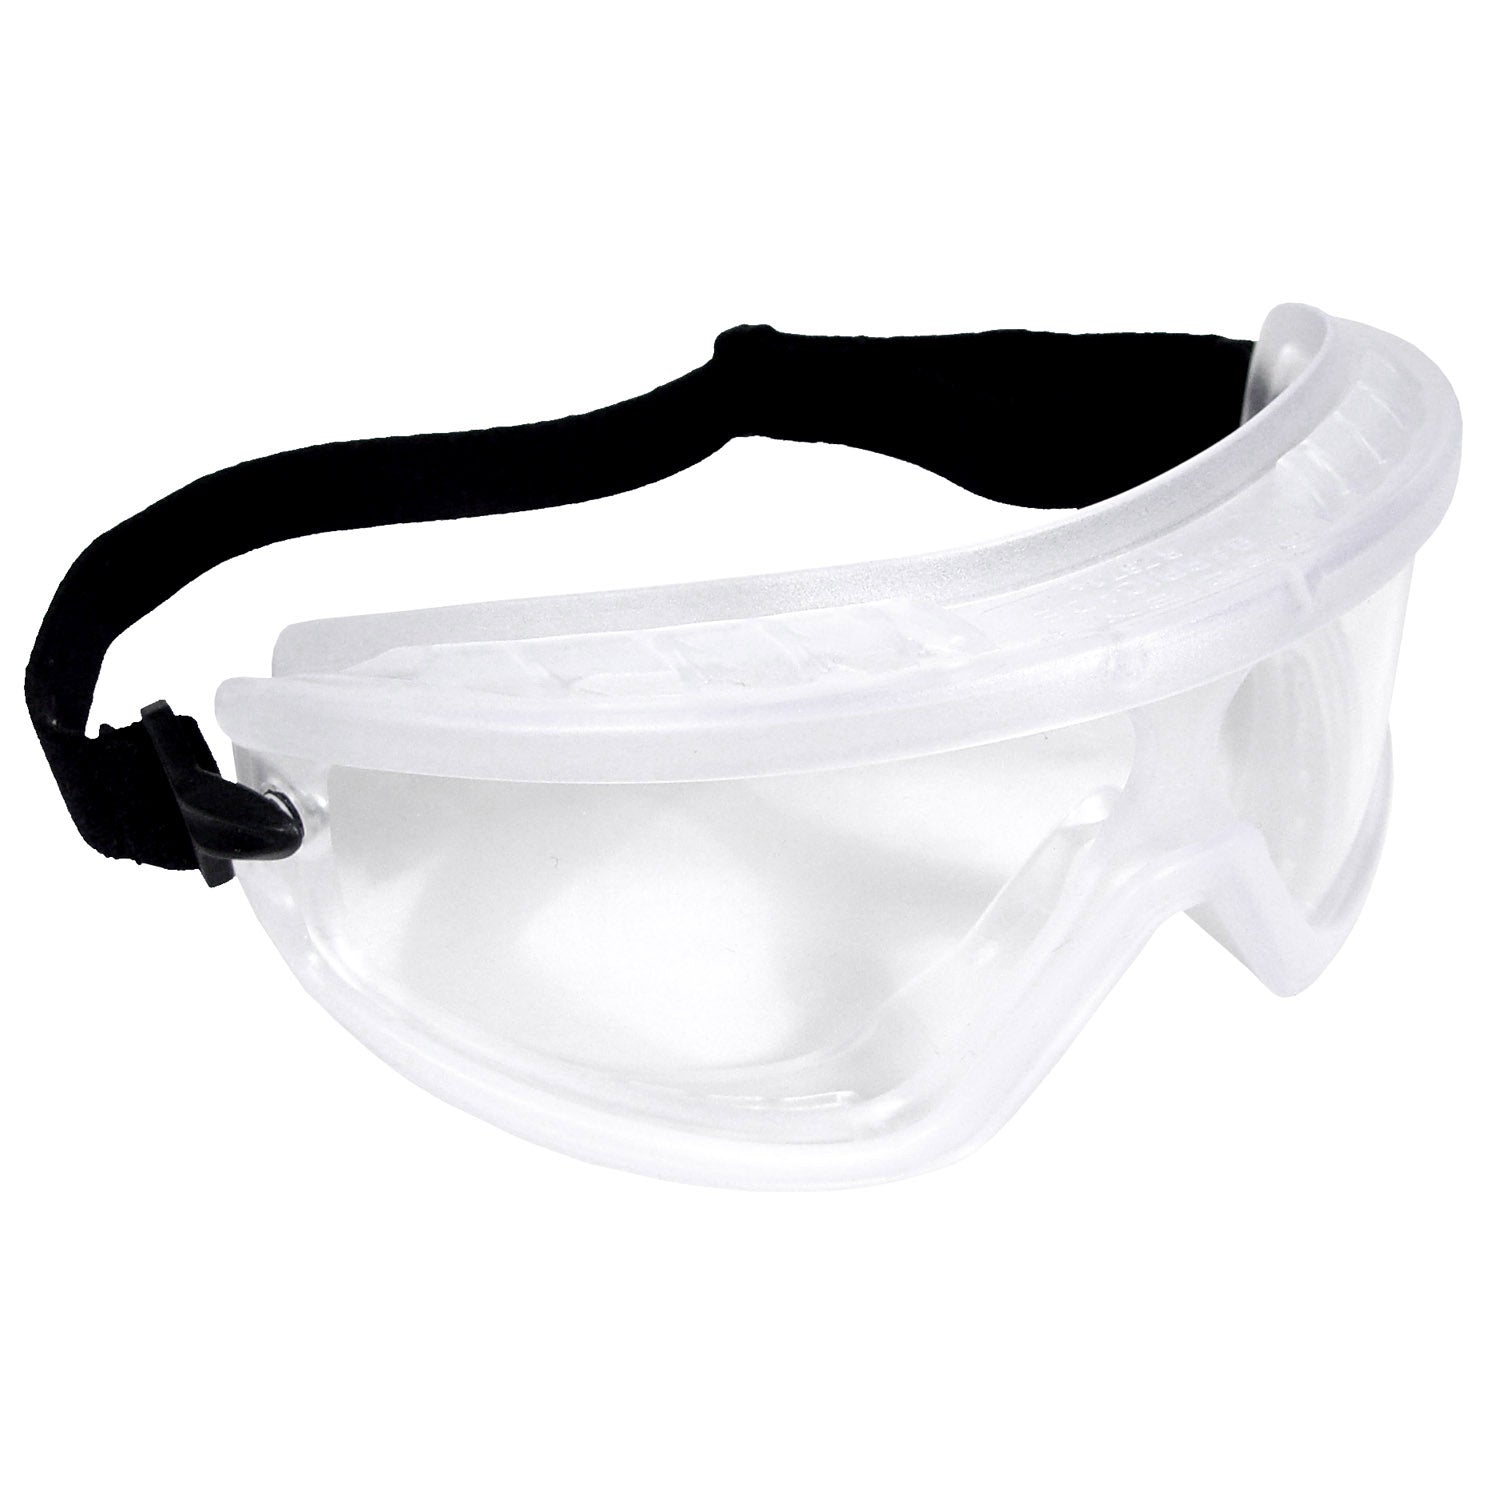 Barricade Safety Goggles (Box of 10)